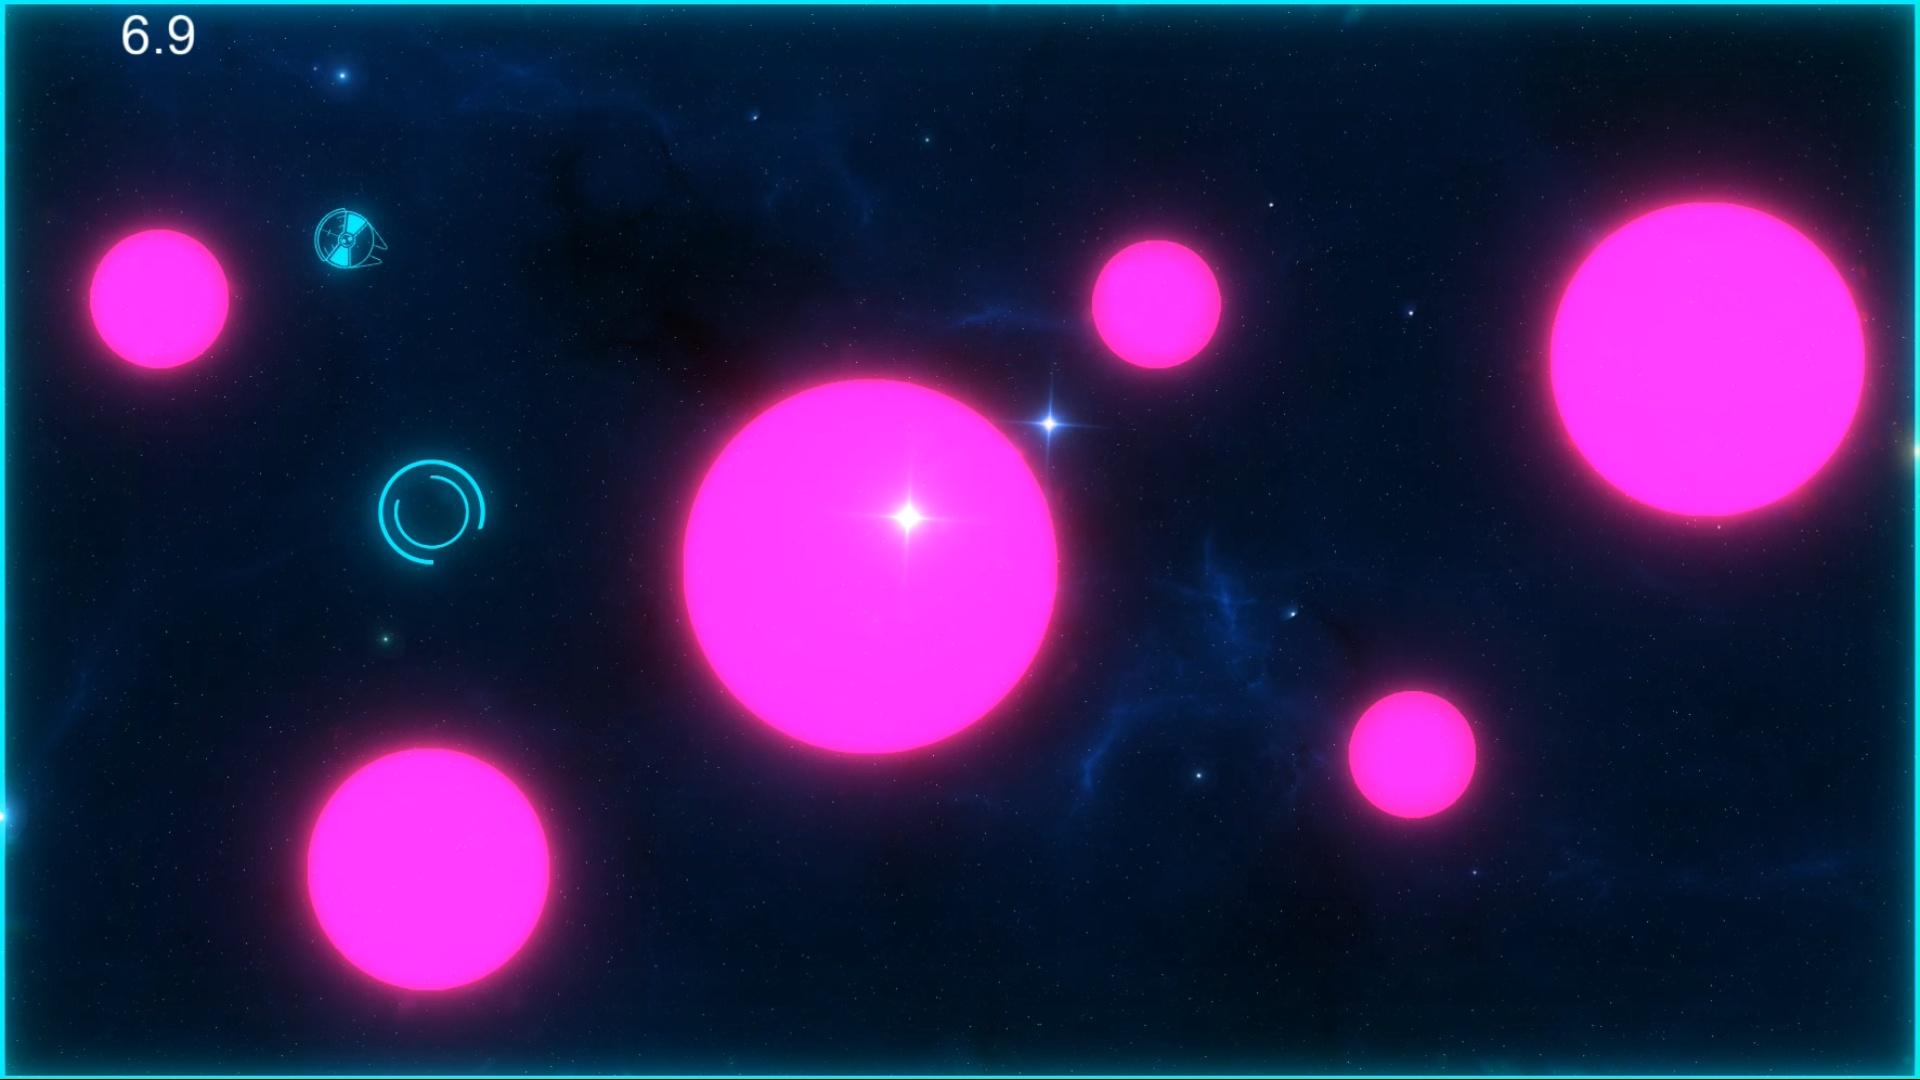 Screenshot №11 from game Neon Space 2